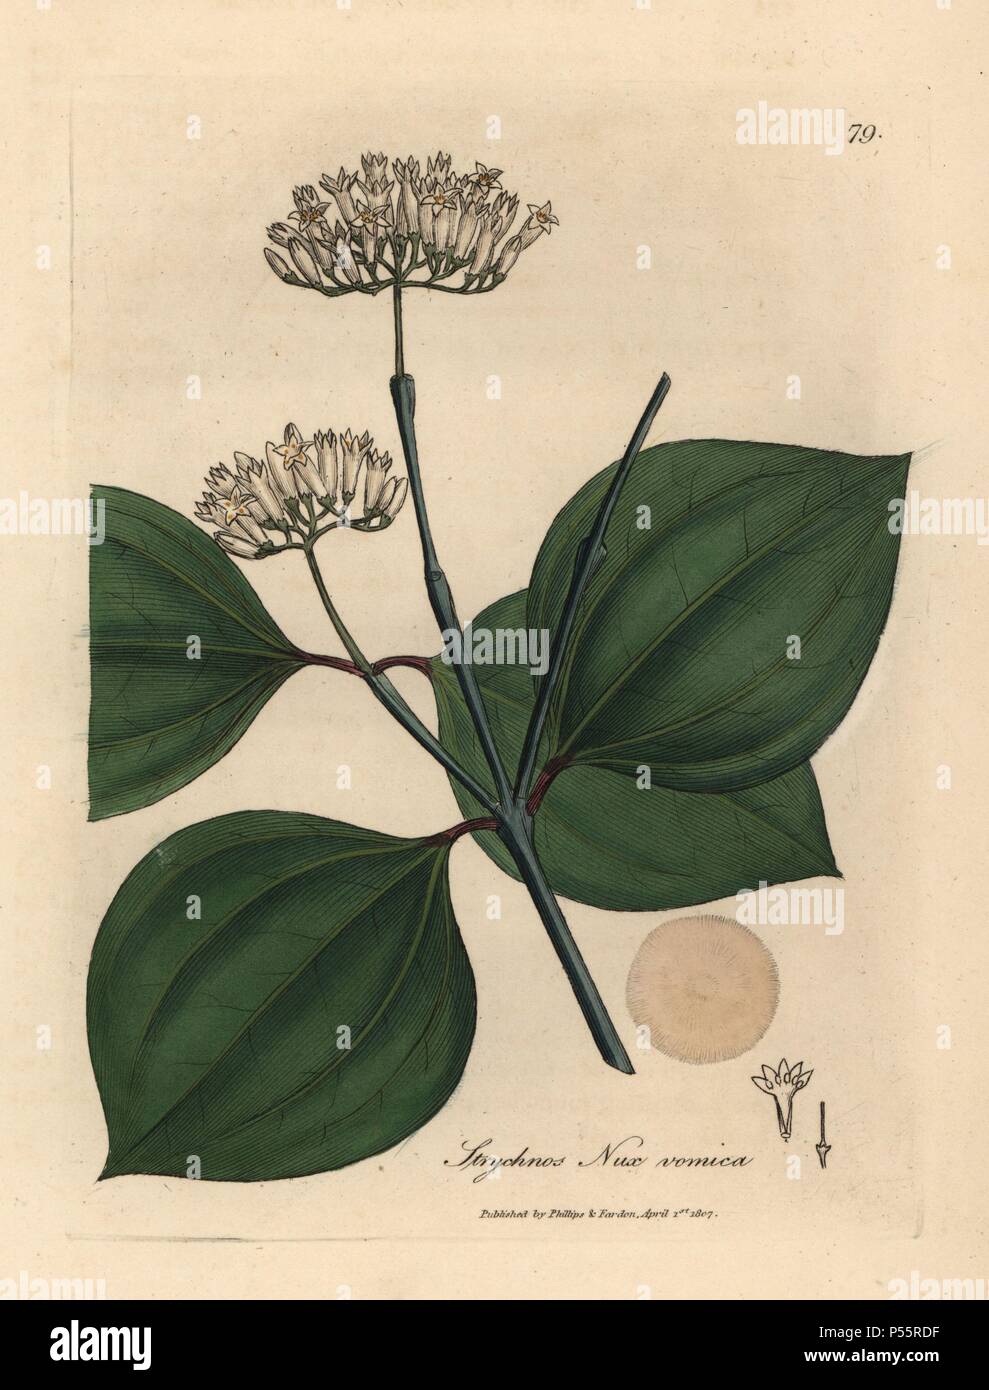 White flowered poison nut or vomic nut, Strychnos nux vomica. Handcolored copperplate engraving from a botanical illustration by James Sowerby from William Woodville and Sir William Jackson Hooker's 'Medical Botany' 1832. The tireless Sowerby (1757-1822) drew over 2,500 plants for Smith's mammoth 'English Botany' (1790-1814) and 440 mushrooms for 'Coloured Figures of English Fungi ' (1797) among many other works. Stock Photo